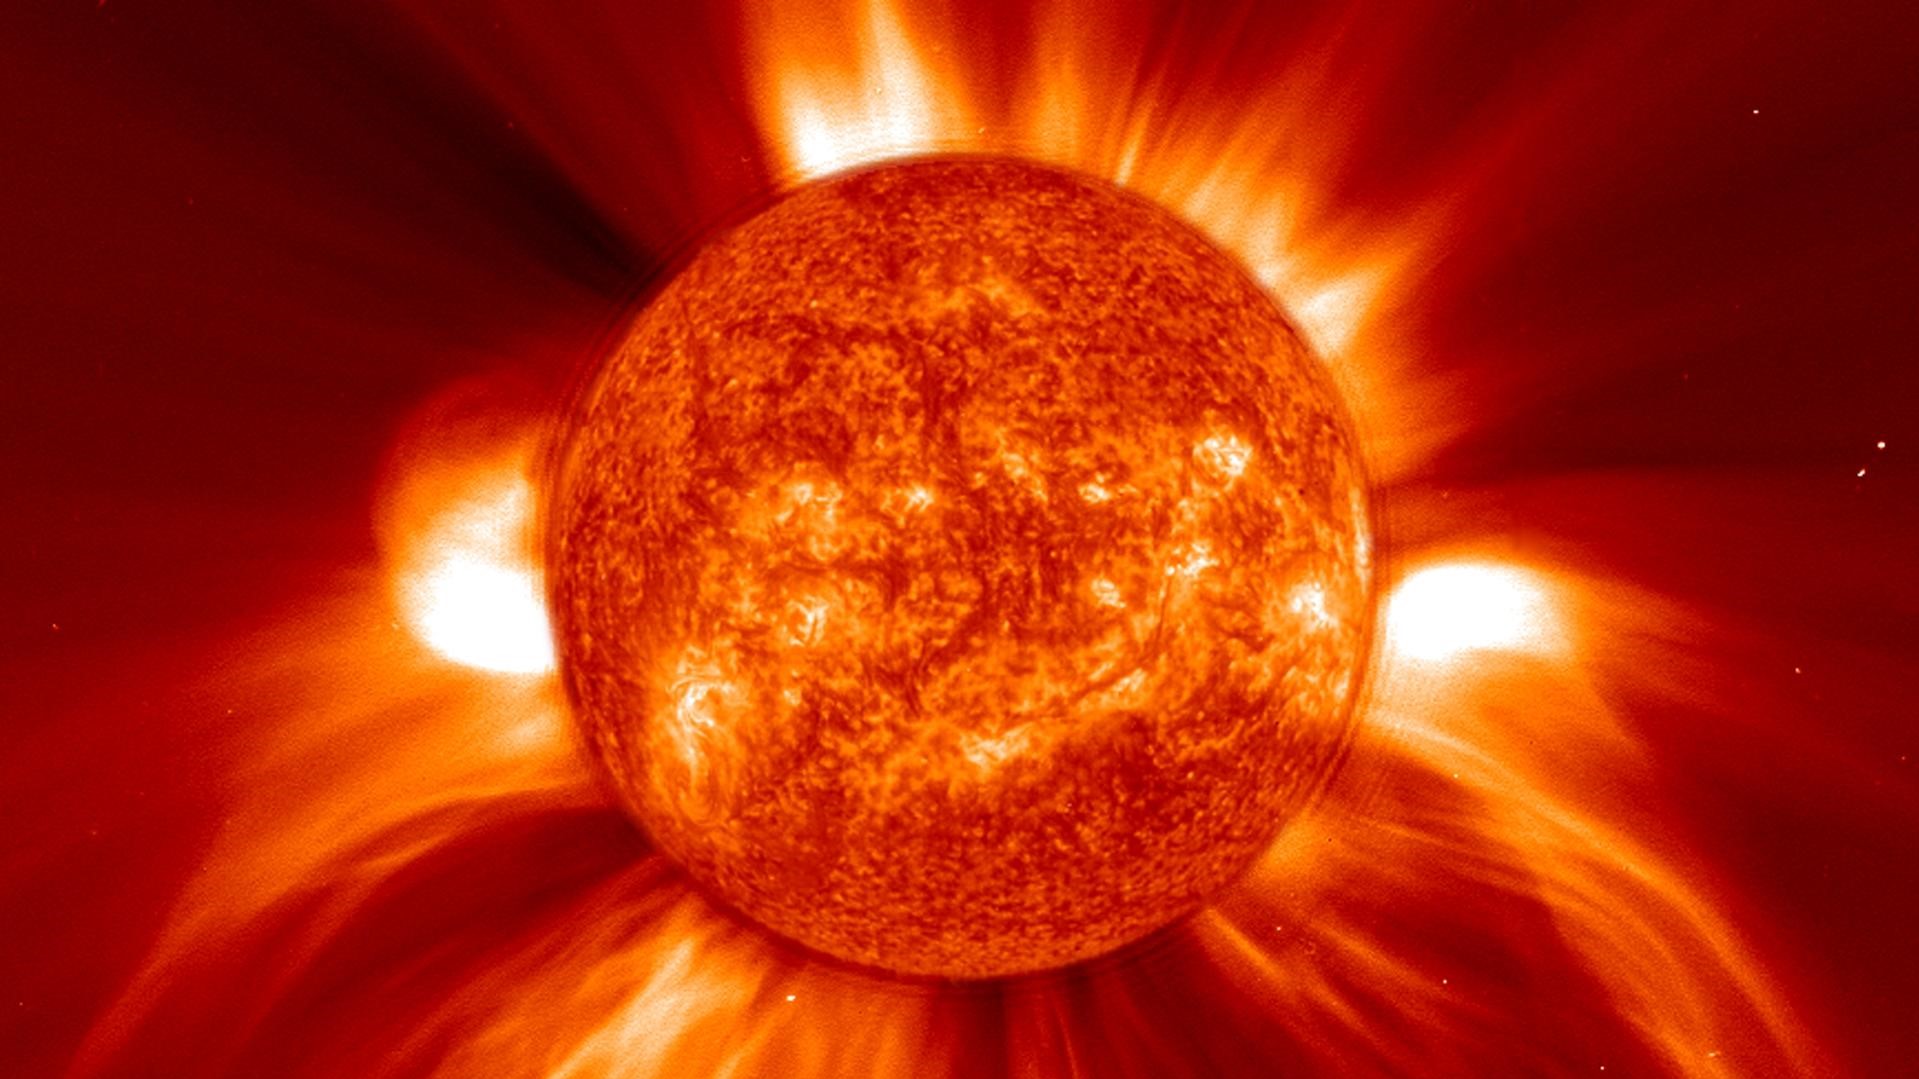 Large coronal mass ejection erupts from the sun.